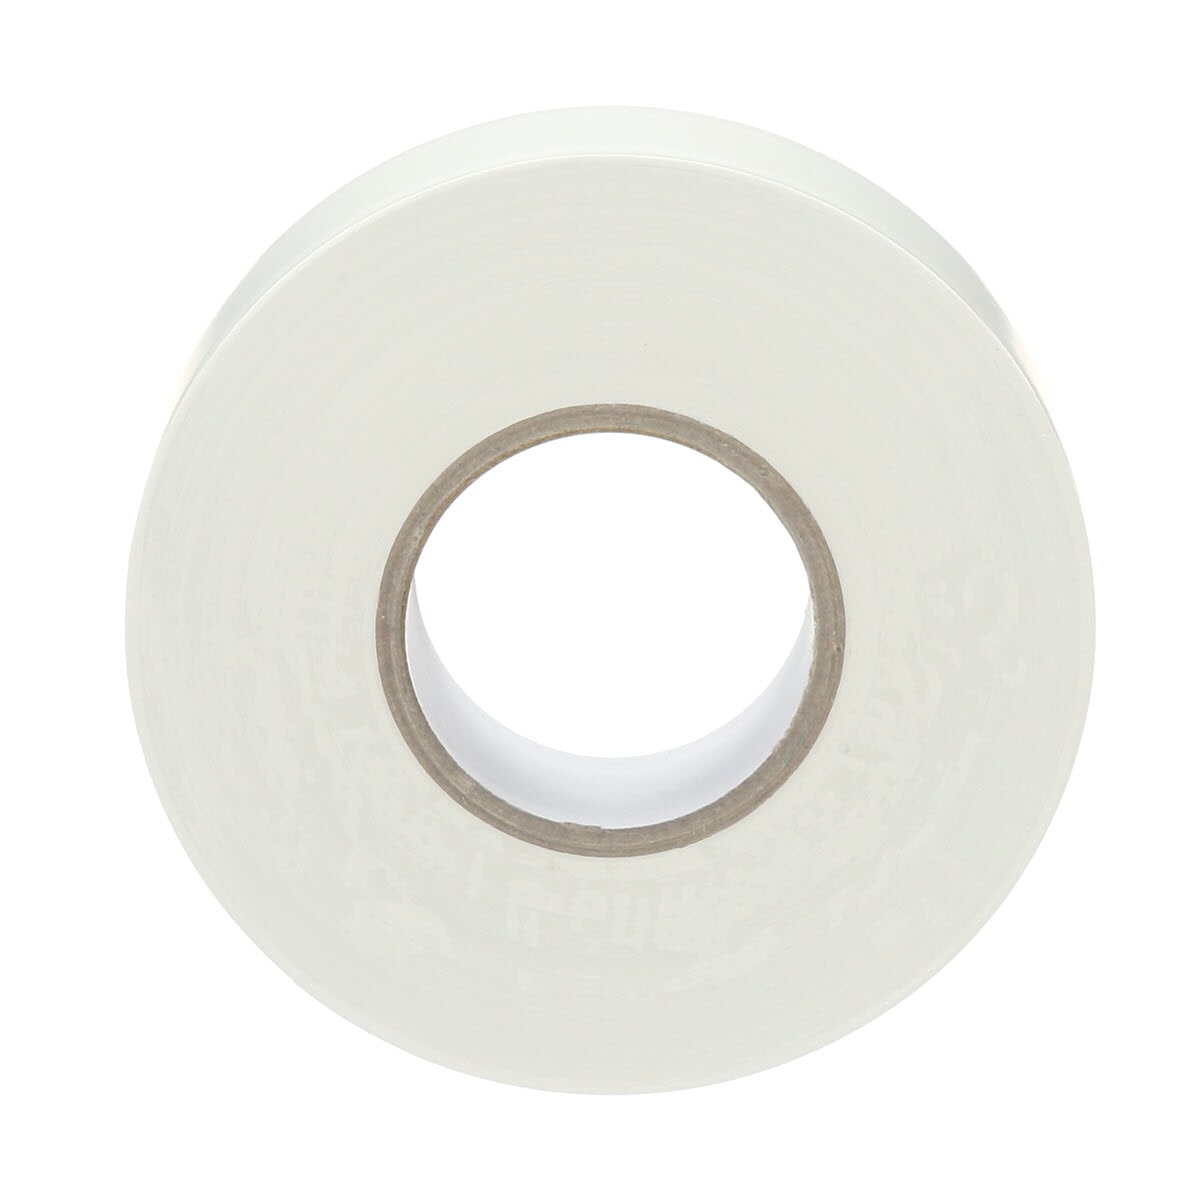 Venture Tape 7100043868 Rubber Adhesive Selfwound Tape, 36 yd L x 1 in W x 6 mil THK, PVC